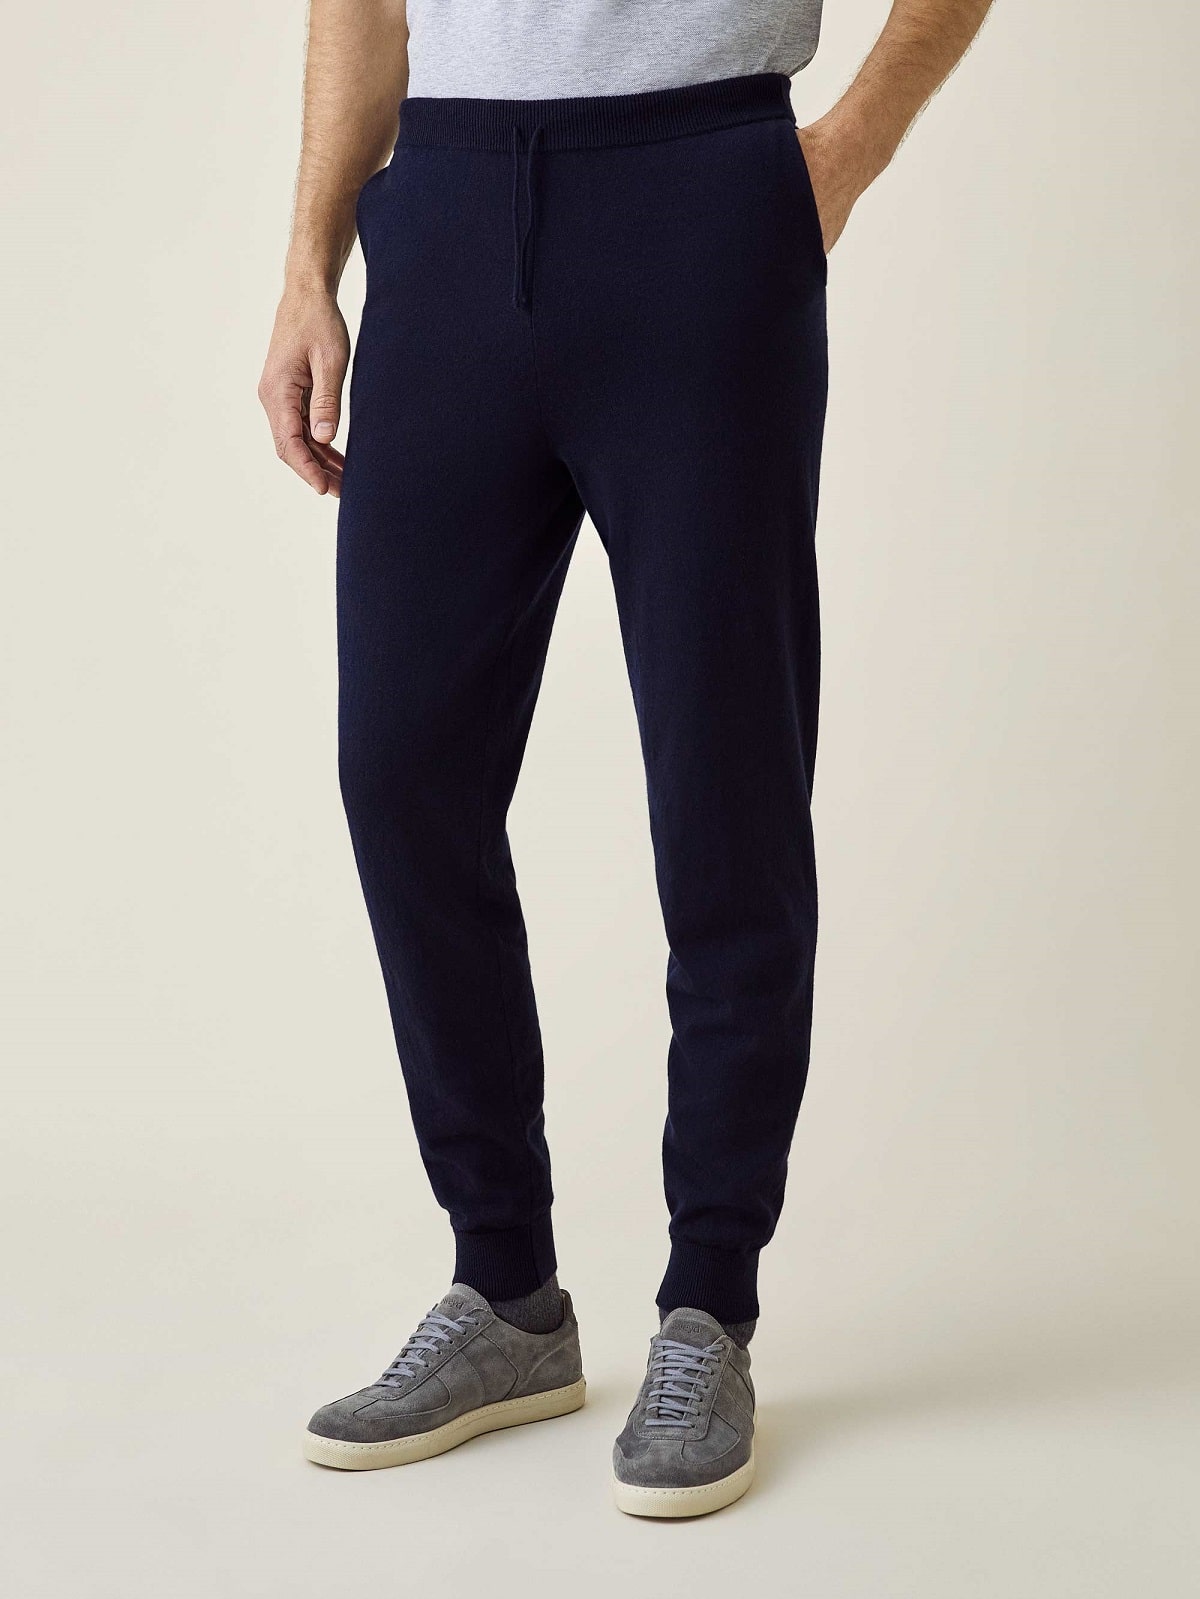 Joggers Trends